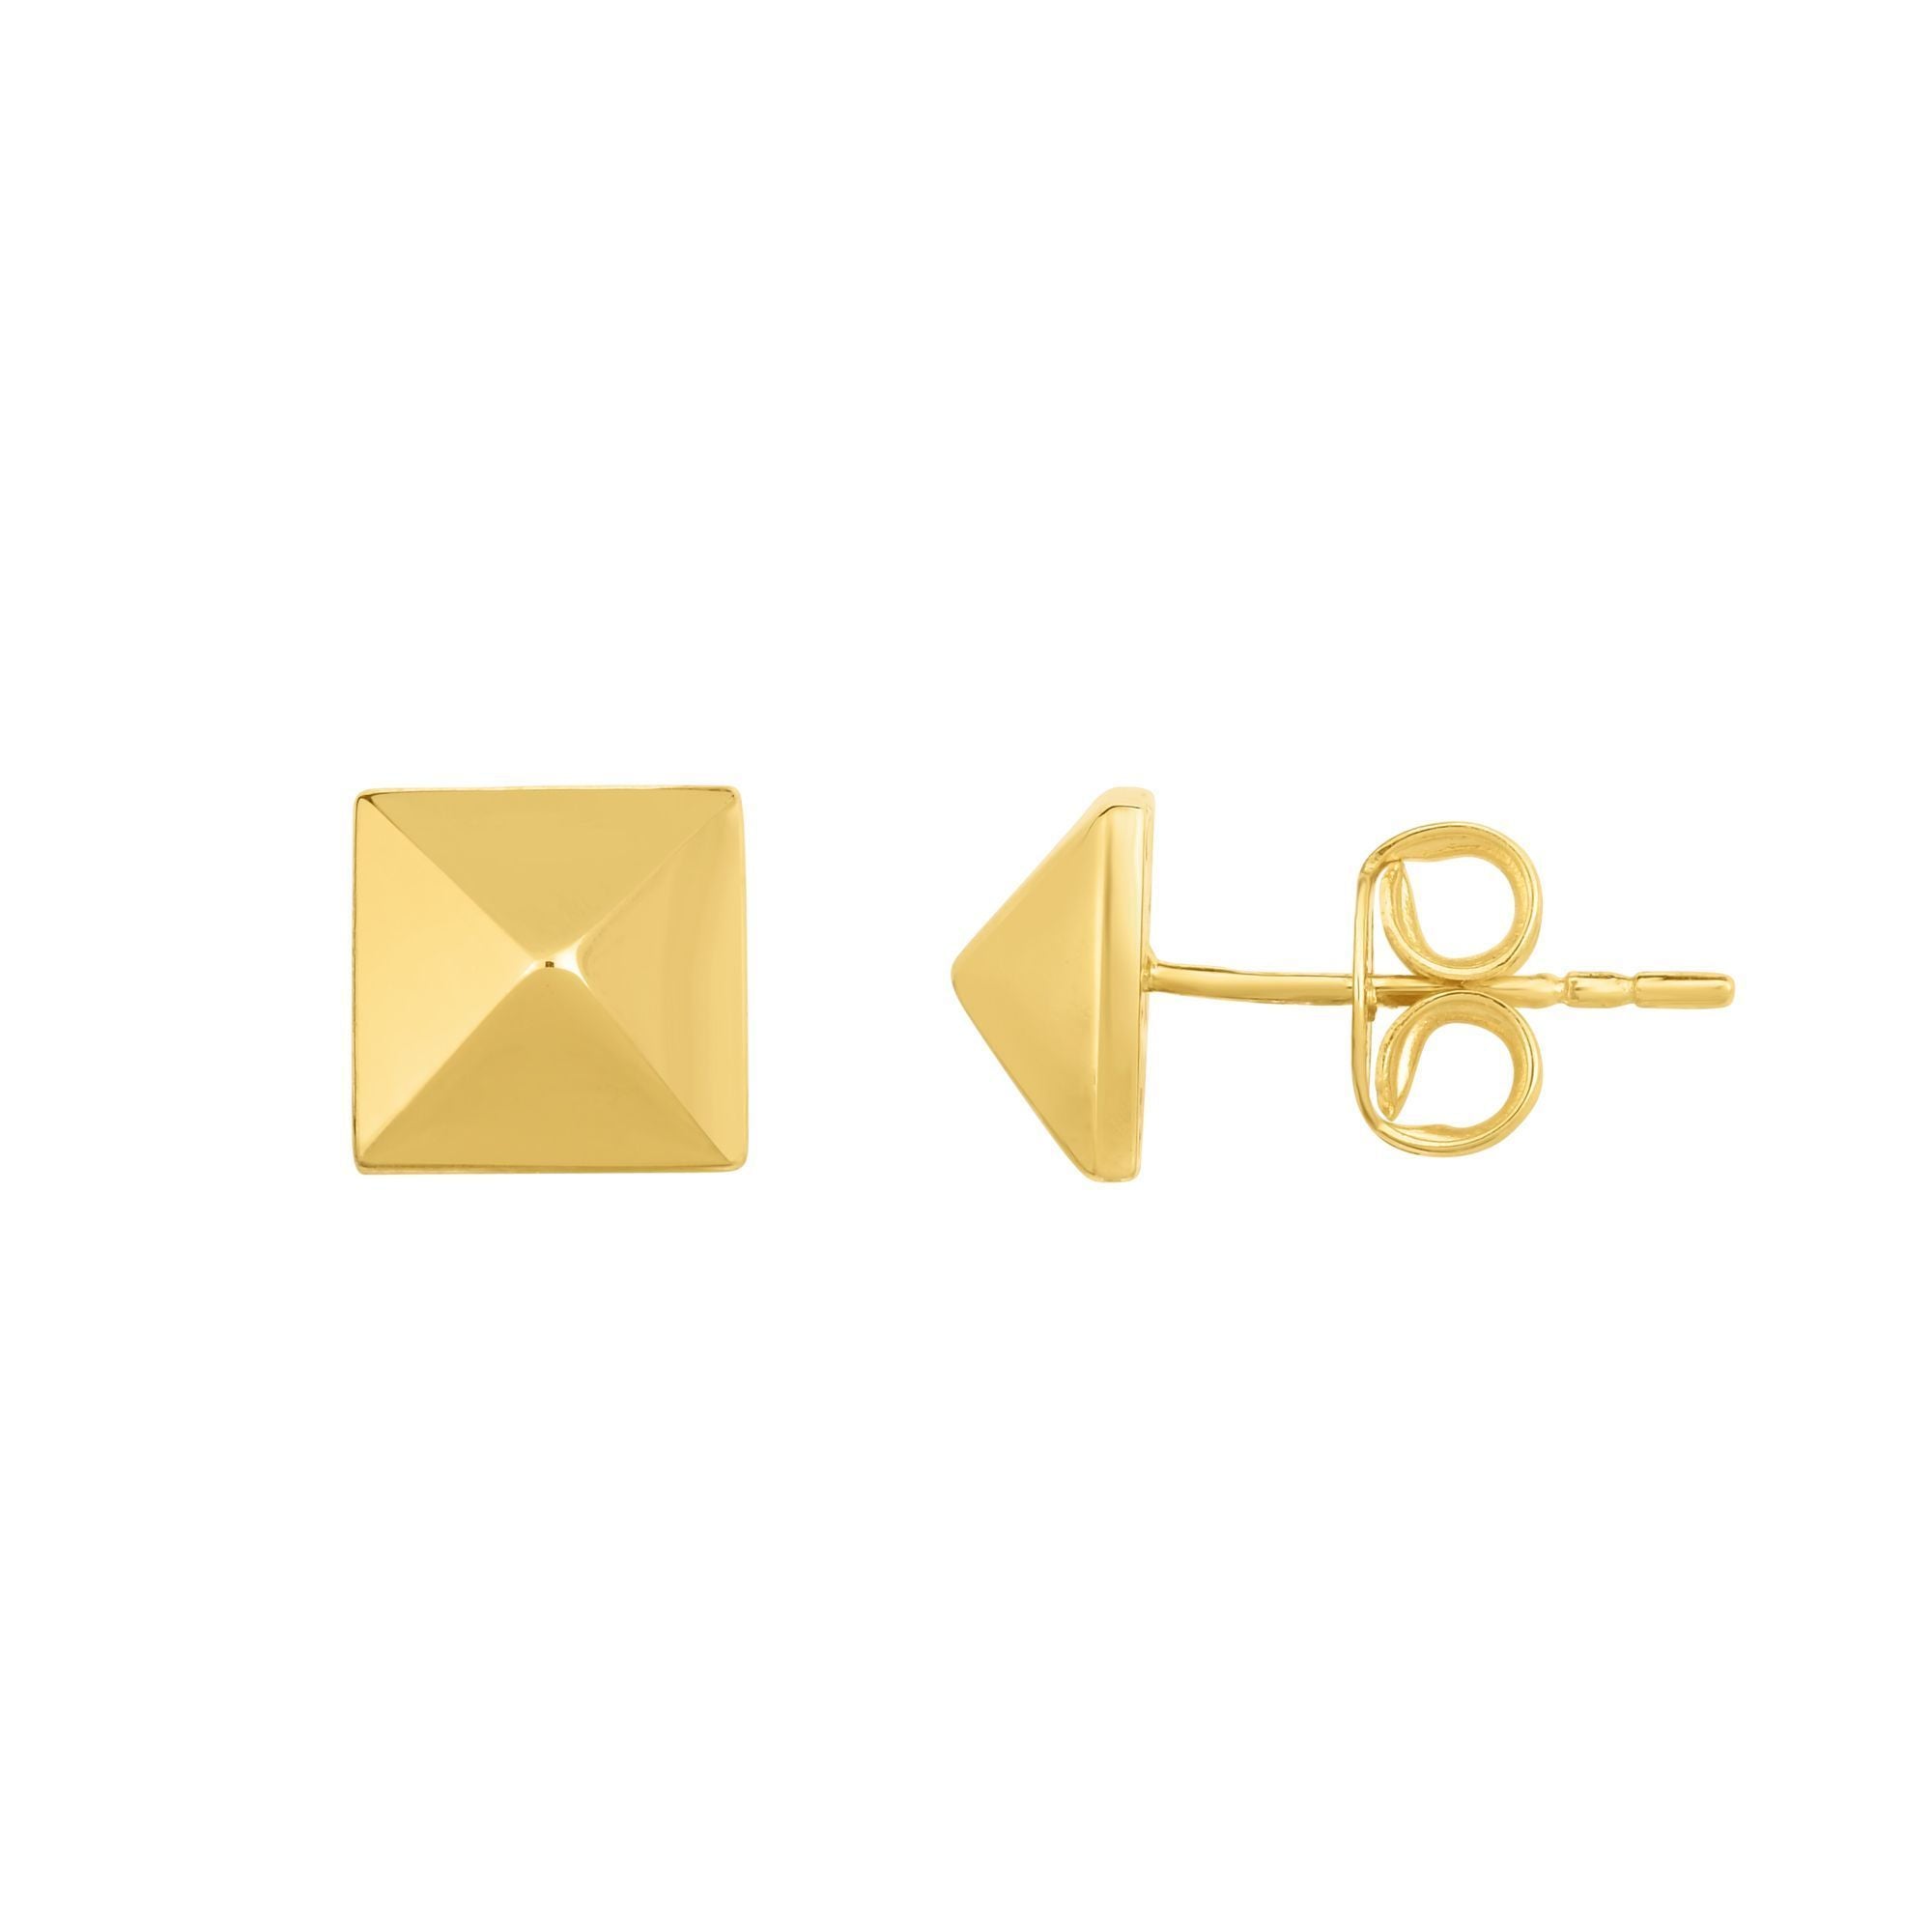 Minimalist Solid Gold Shiny Pyramid Post Earrings with Push Back Clasp - wingroupjewelry